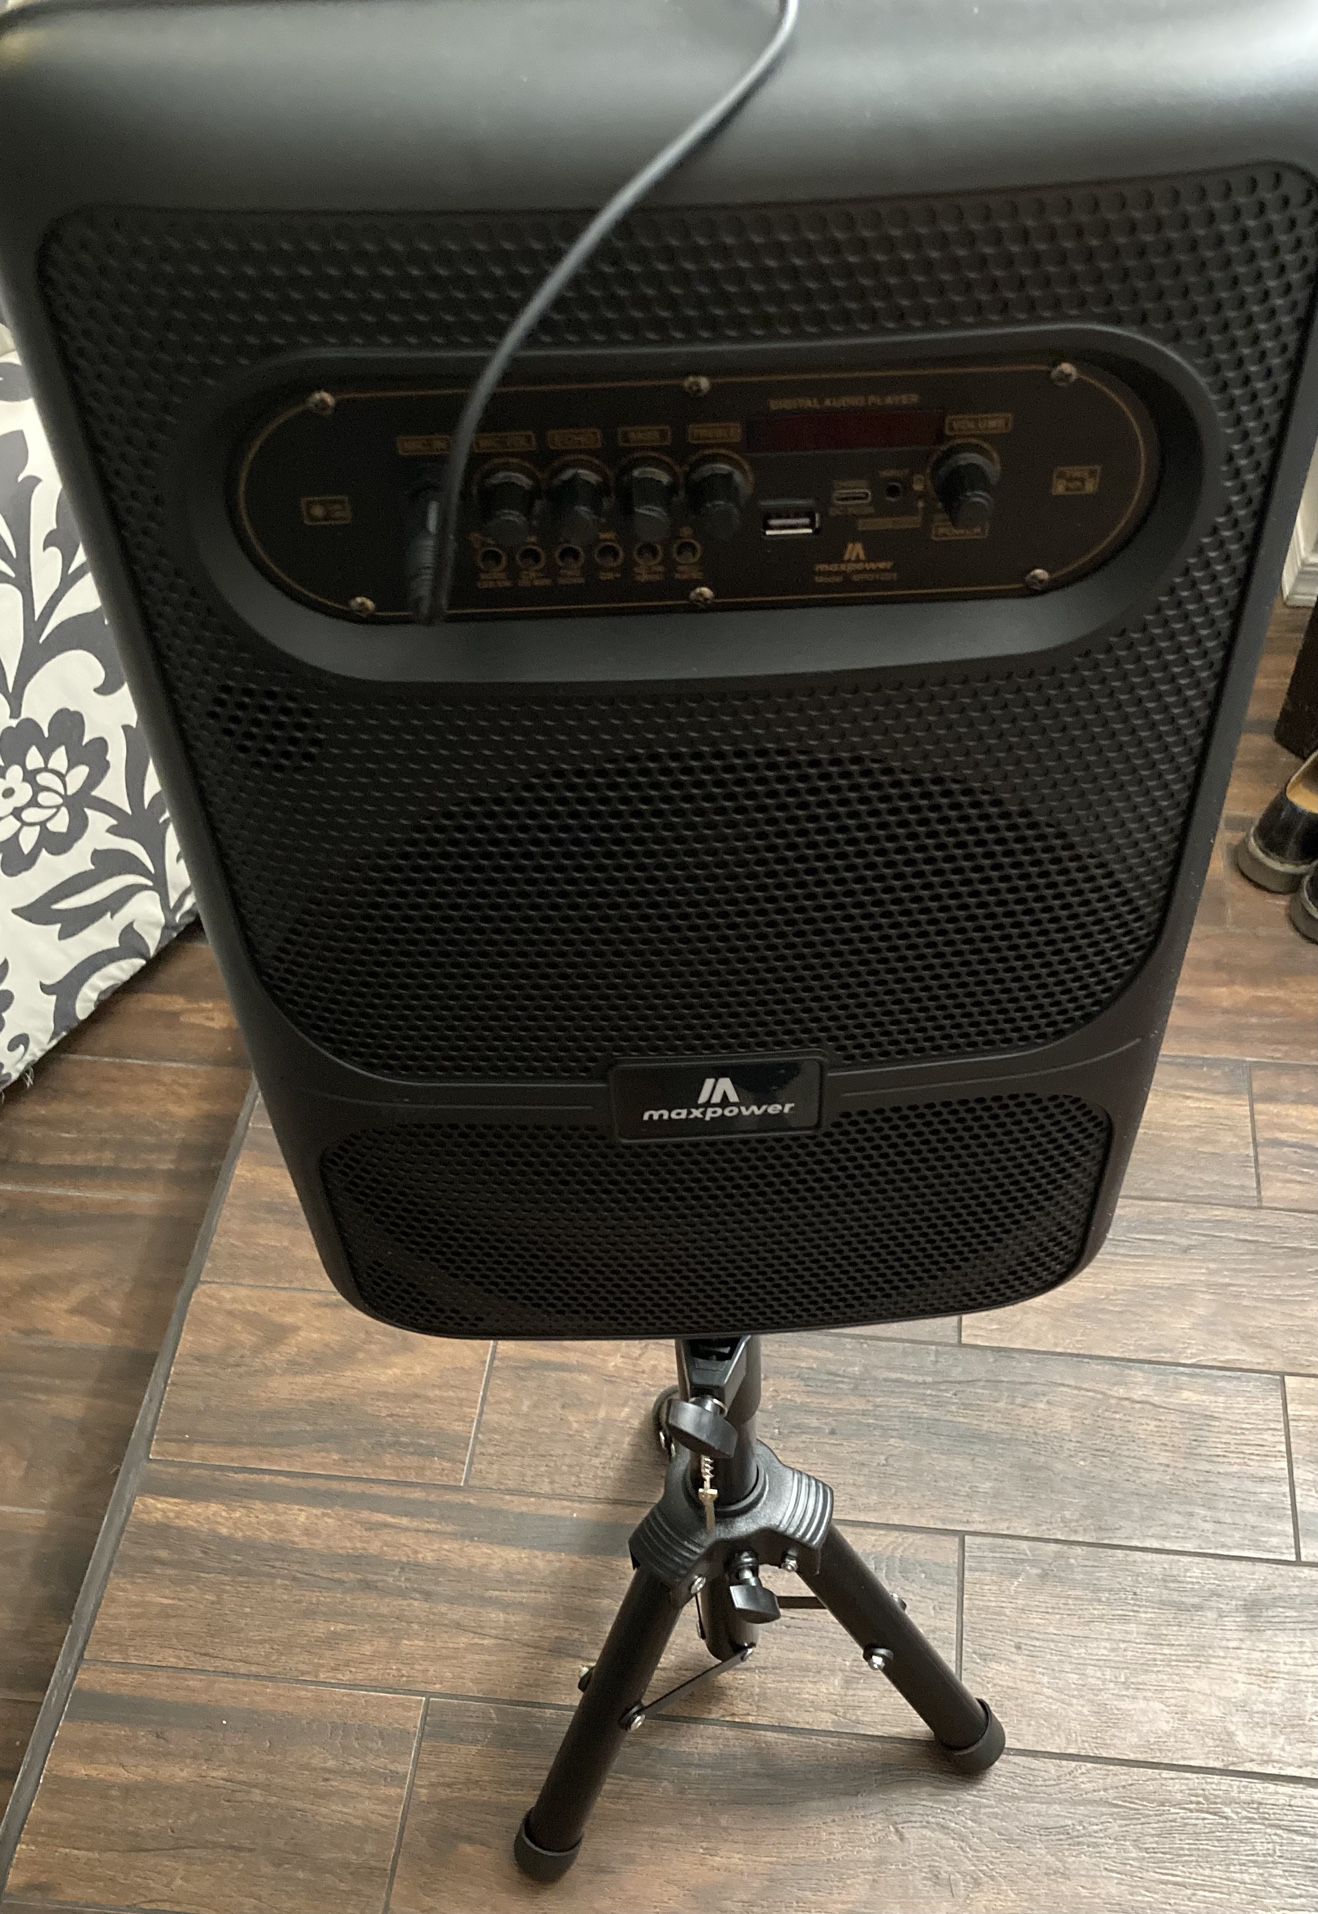 MPD404L Max Power 4 Portable Bluetooth Speaker for Sale in Las Vegas, NV -  OfferUp